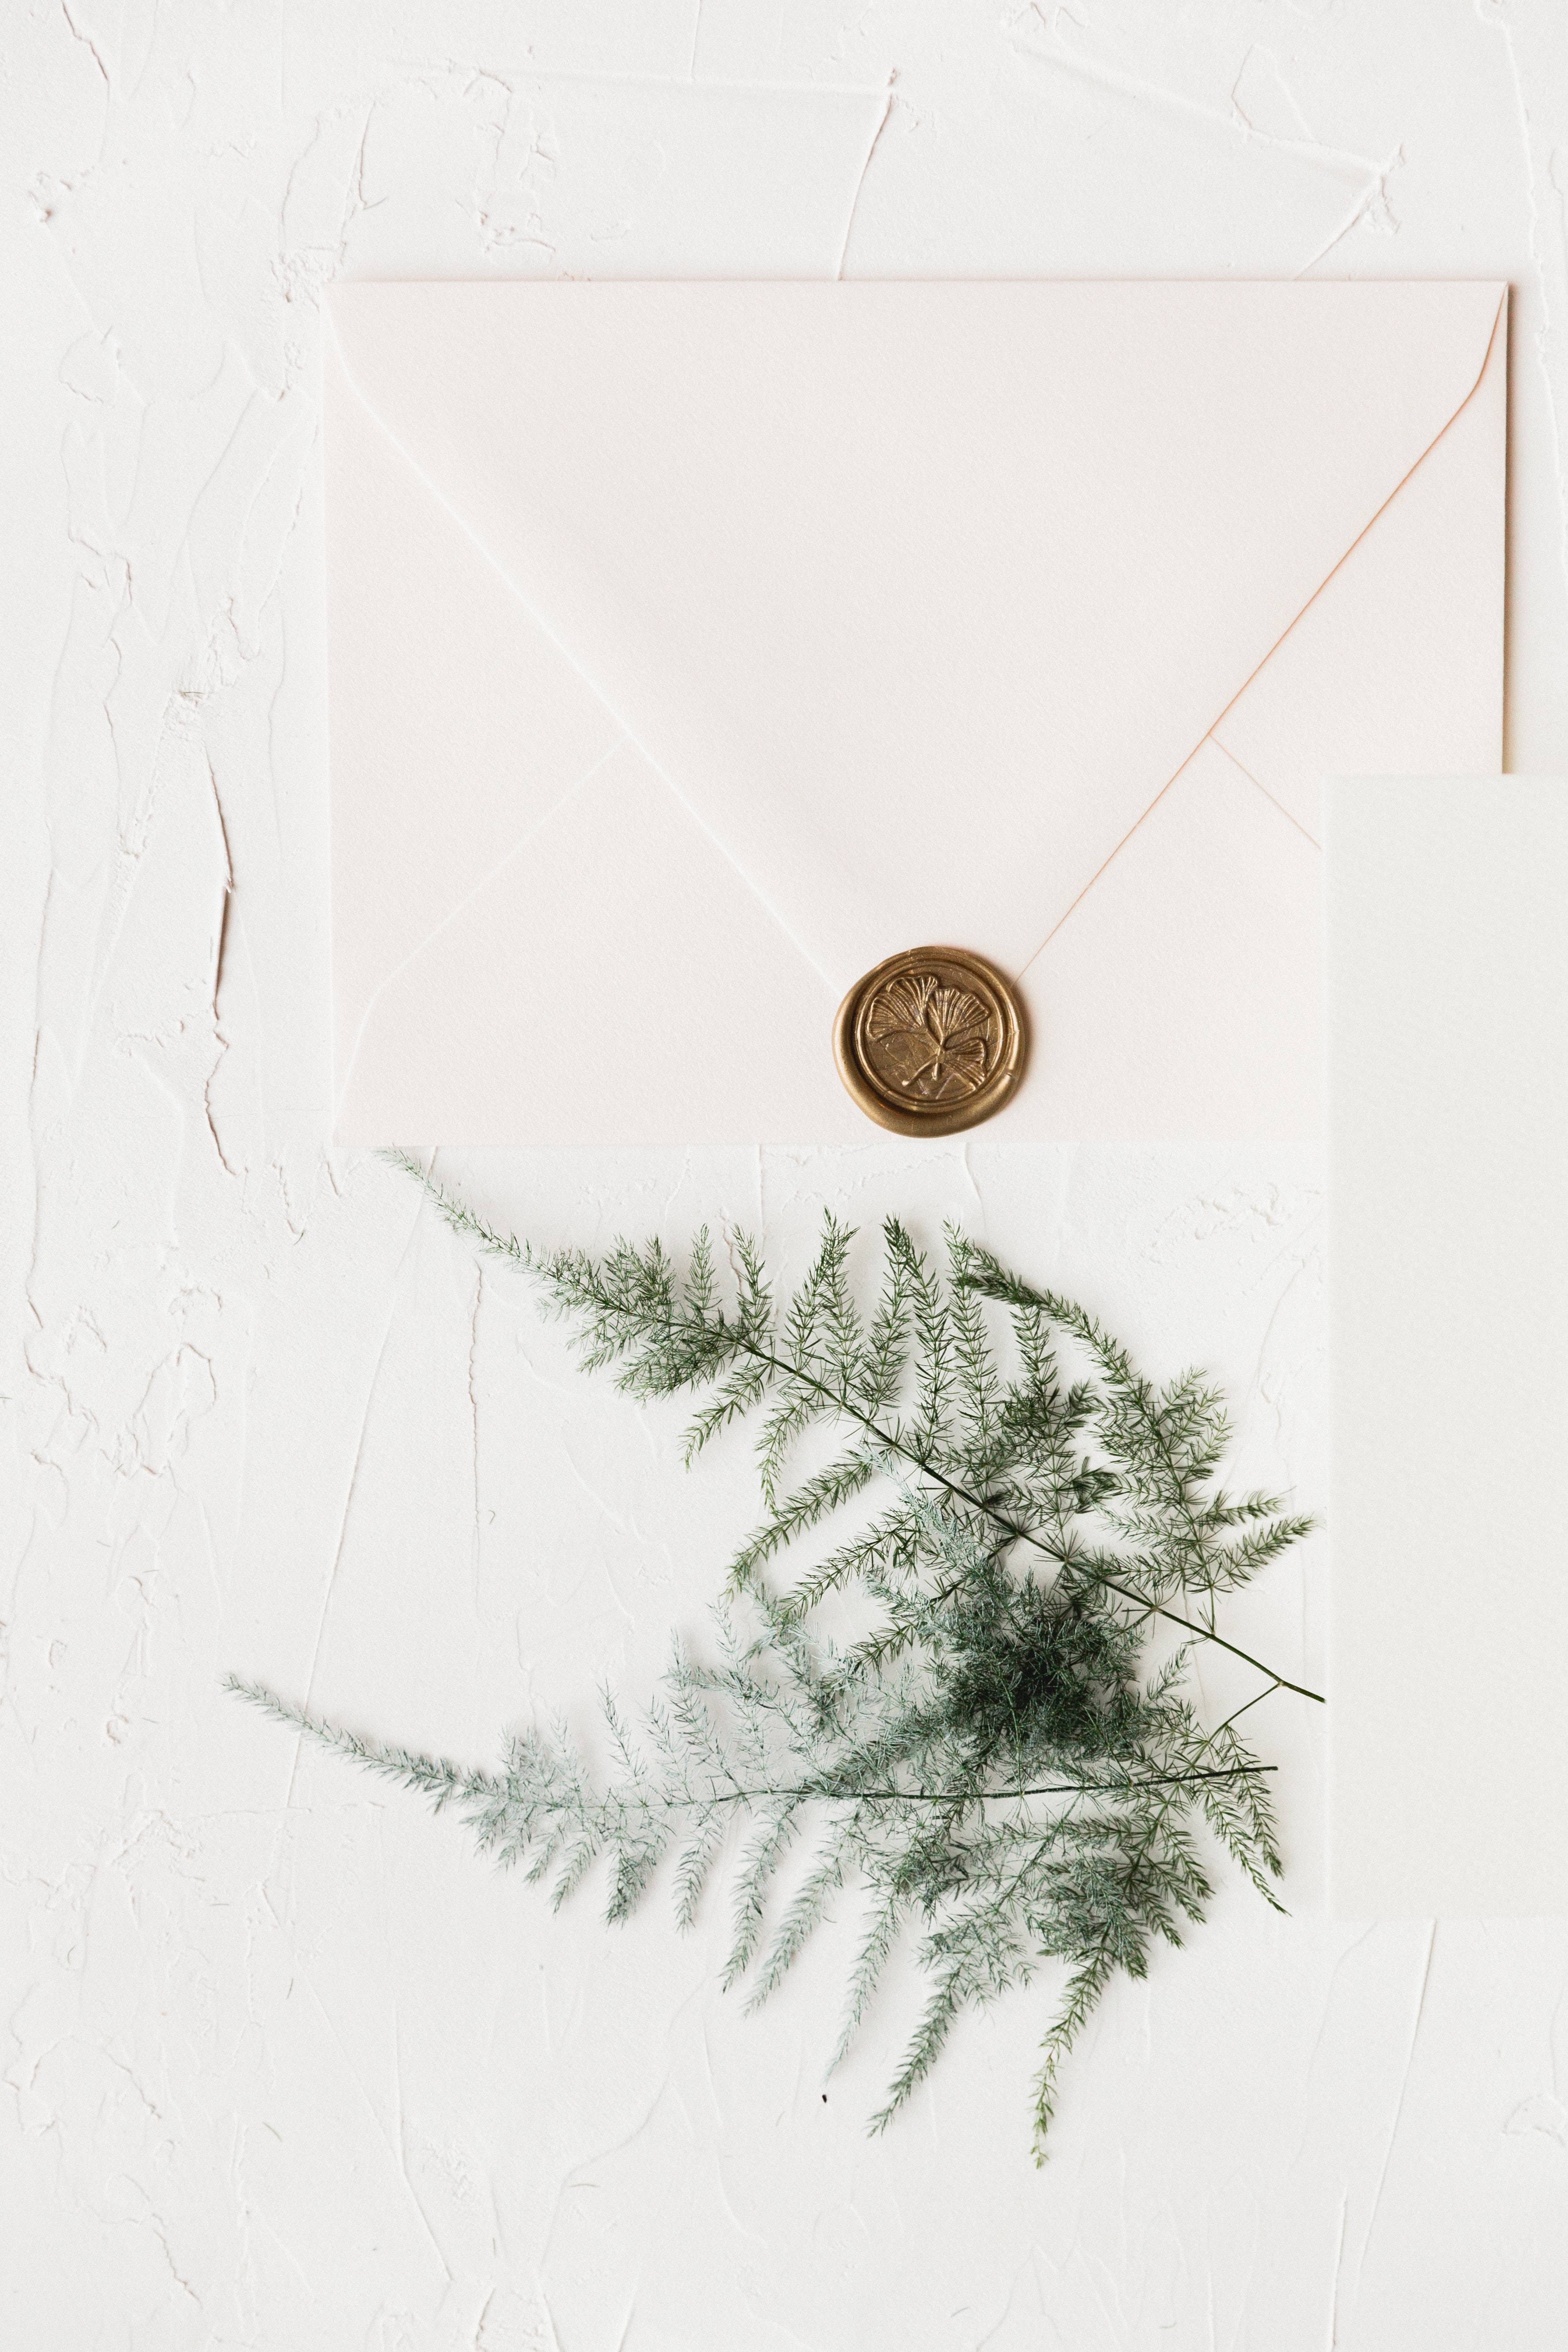 sealed envelop and leaf Photo by Katie Goertzen from Pexels